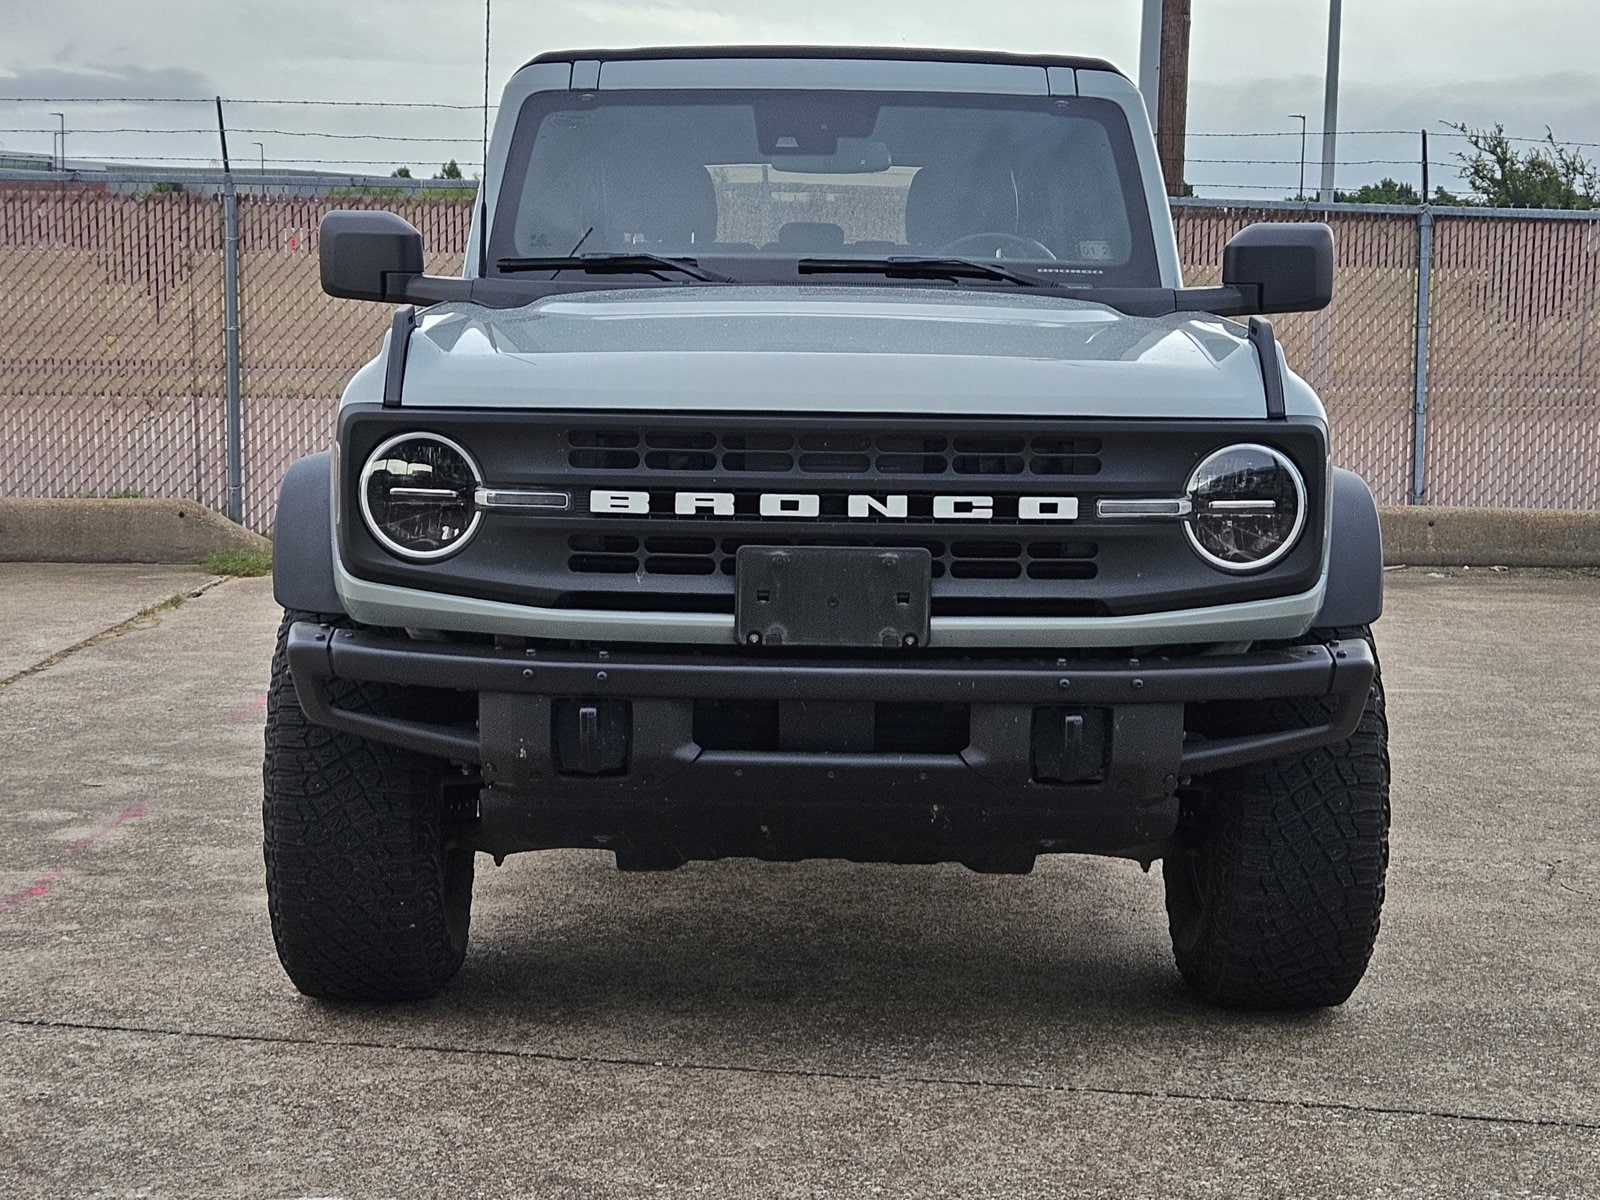 Used 2021 Ford Bronco 4-Door Black Diamond with VIN 1FMEE5DP4MLA63999 for sale in Fort Worth, TX